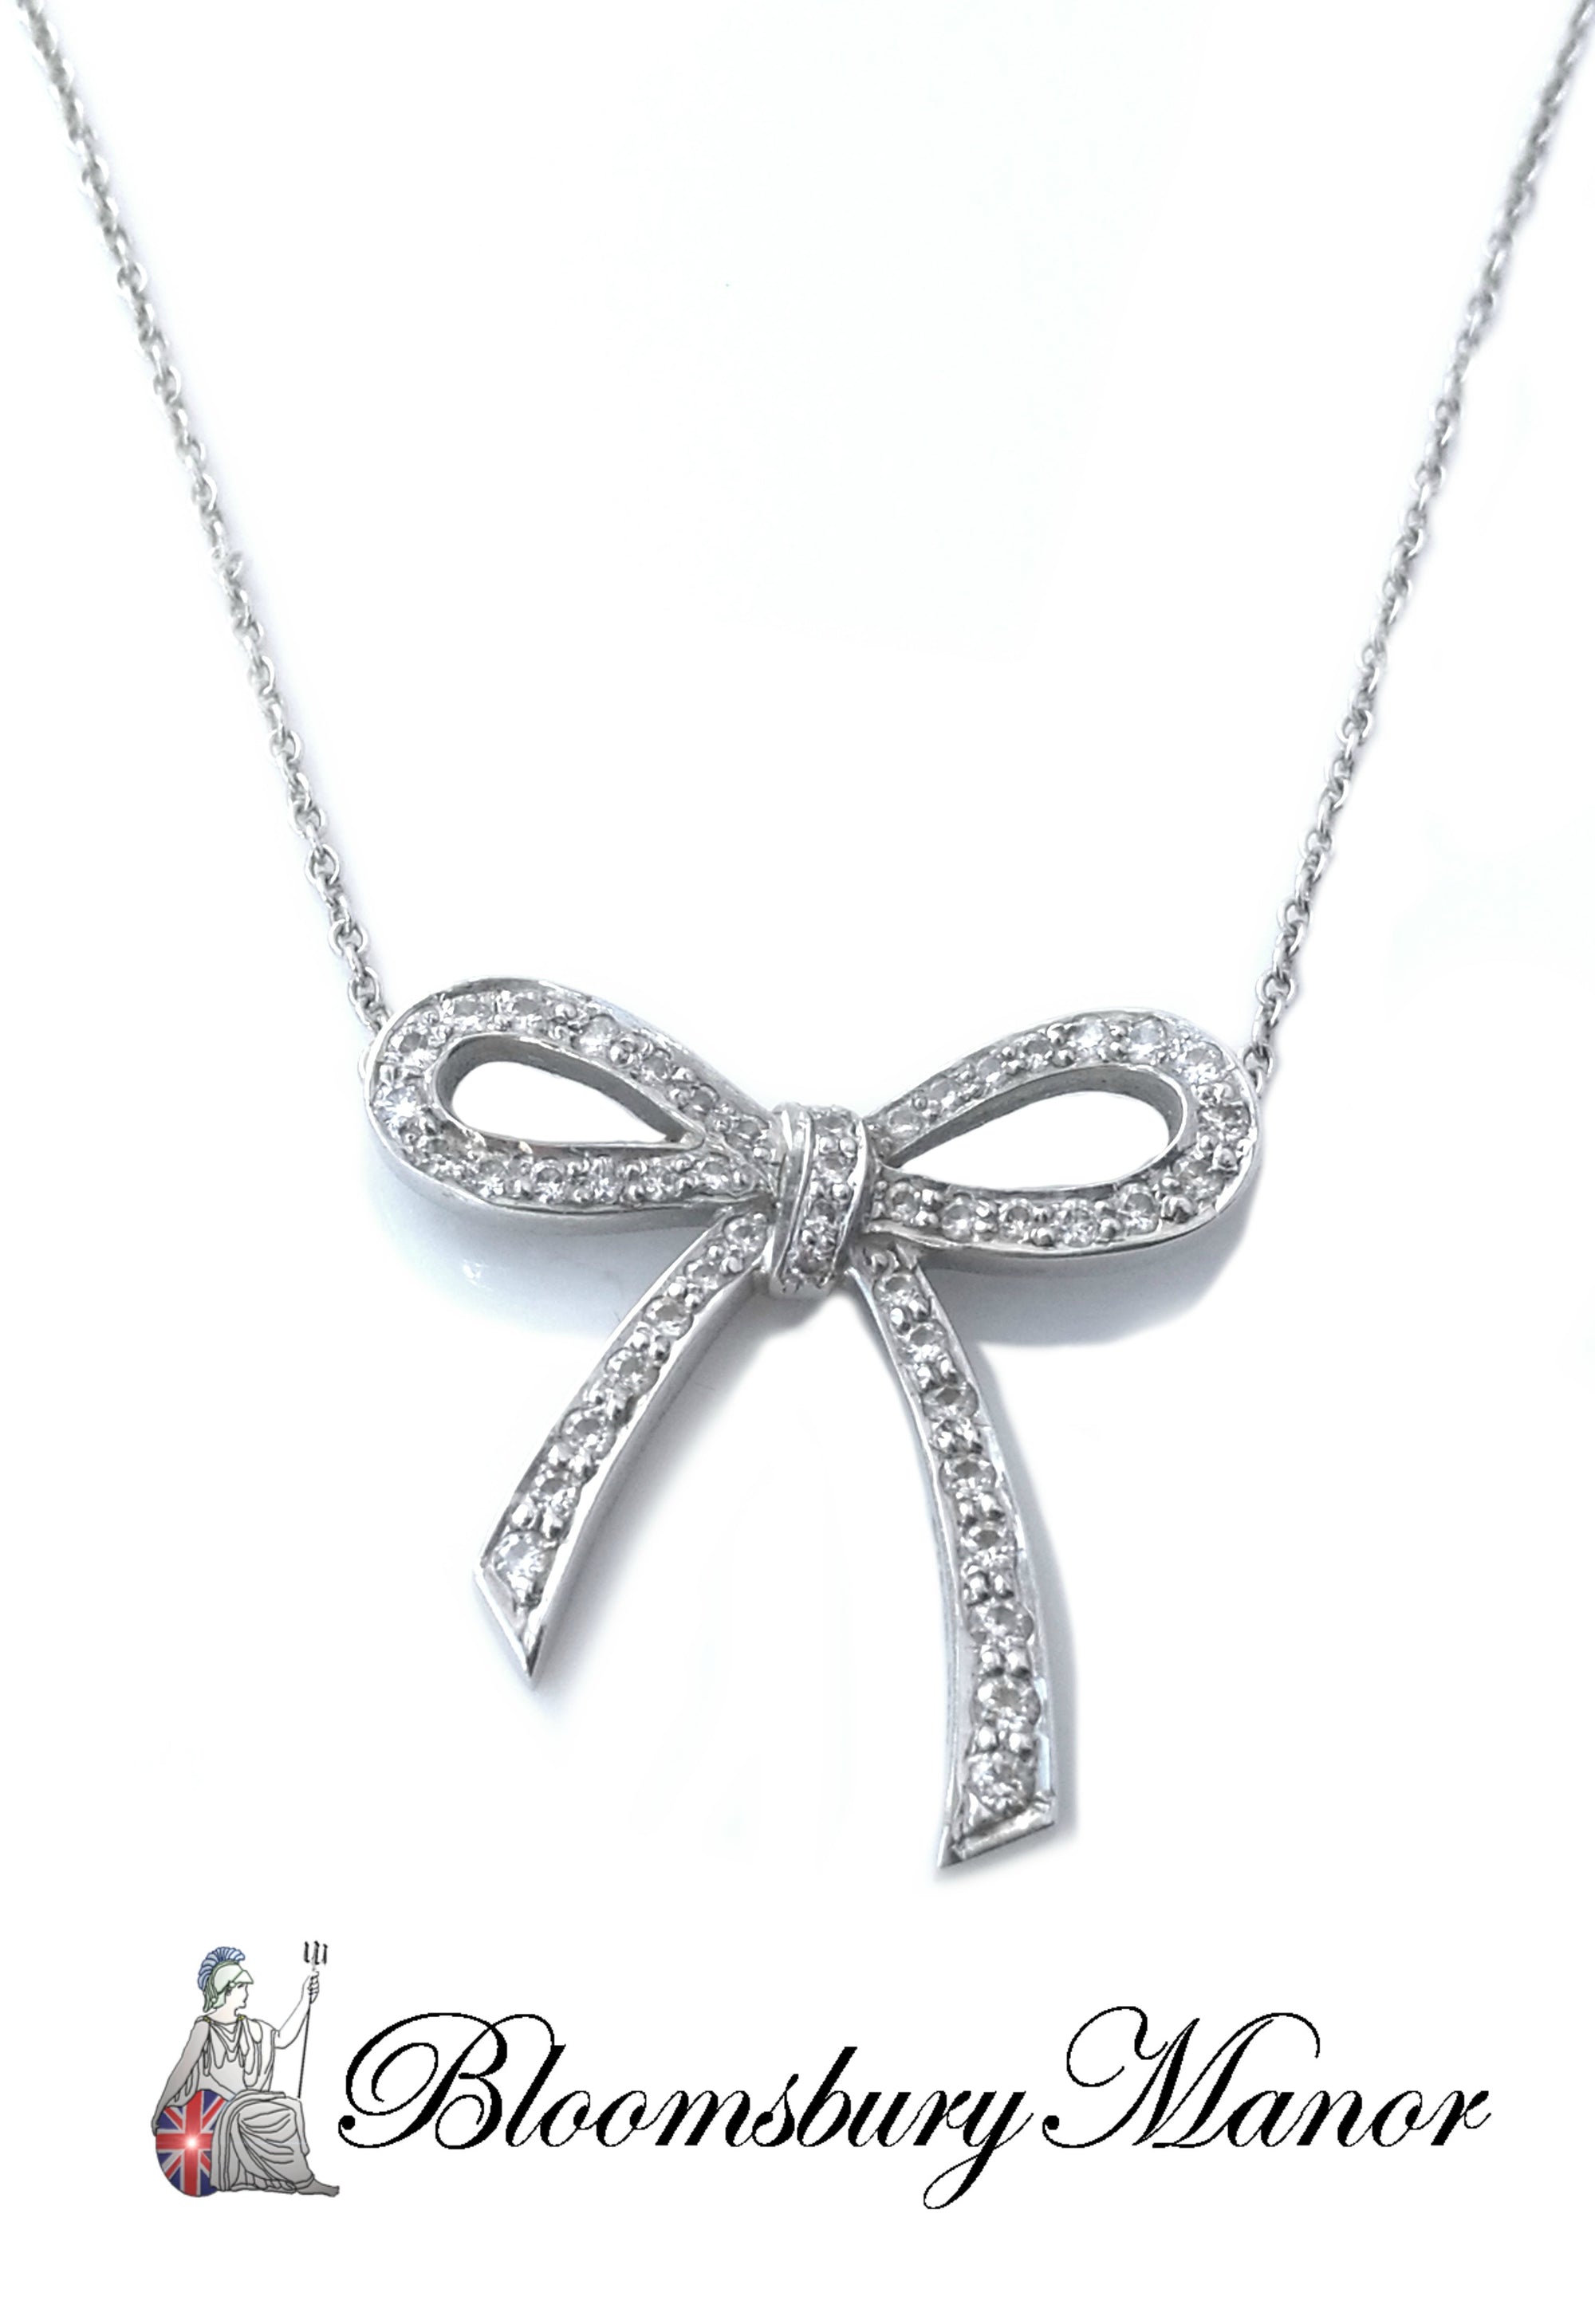 Tiffany & Co Bow Diamond Necklace .27ct Platinum 16 in